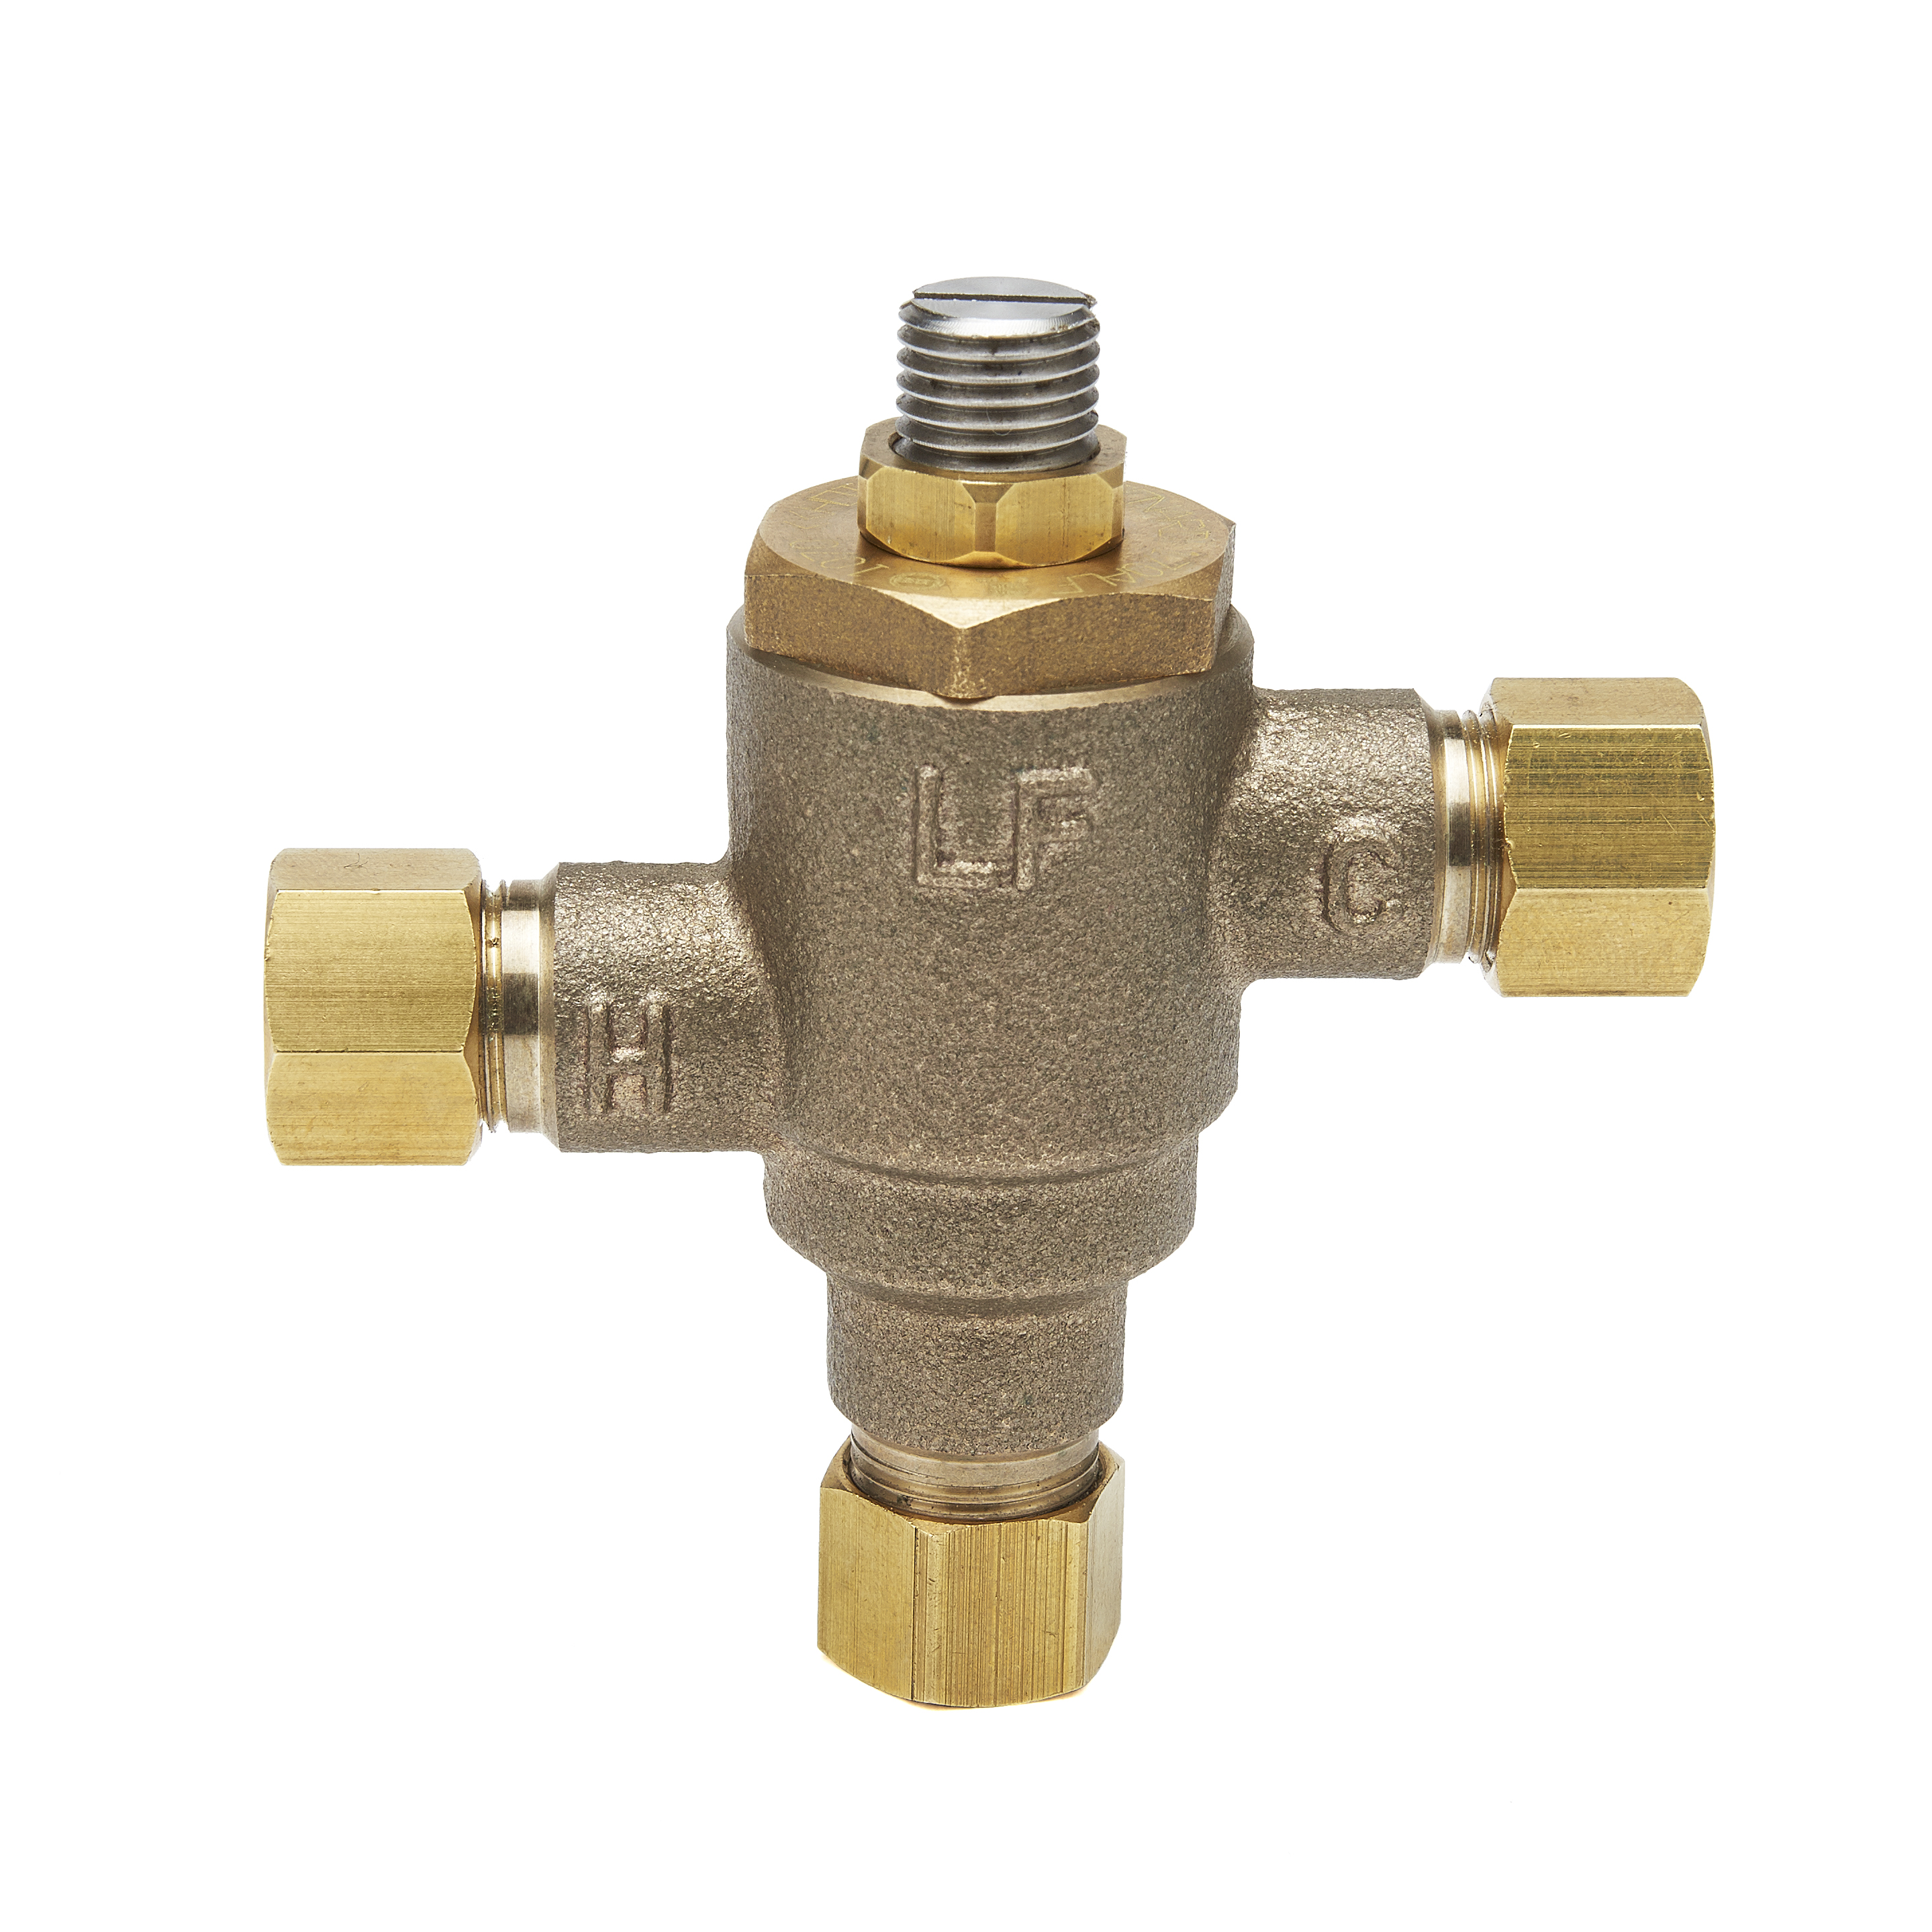 0.25-5 GPM 3/8" Comp Details about   Leonard Thermostatic Faucet Mixing Valve 170A-LF Brass 